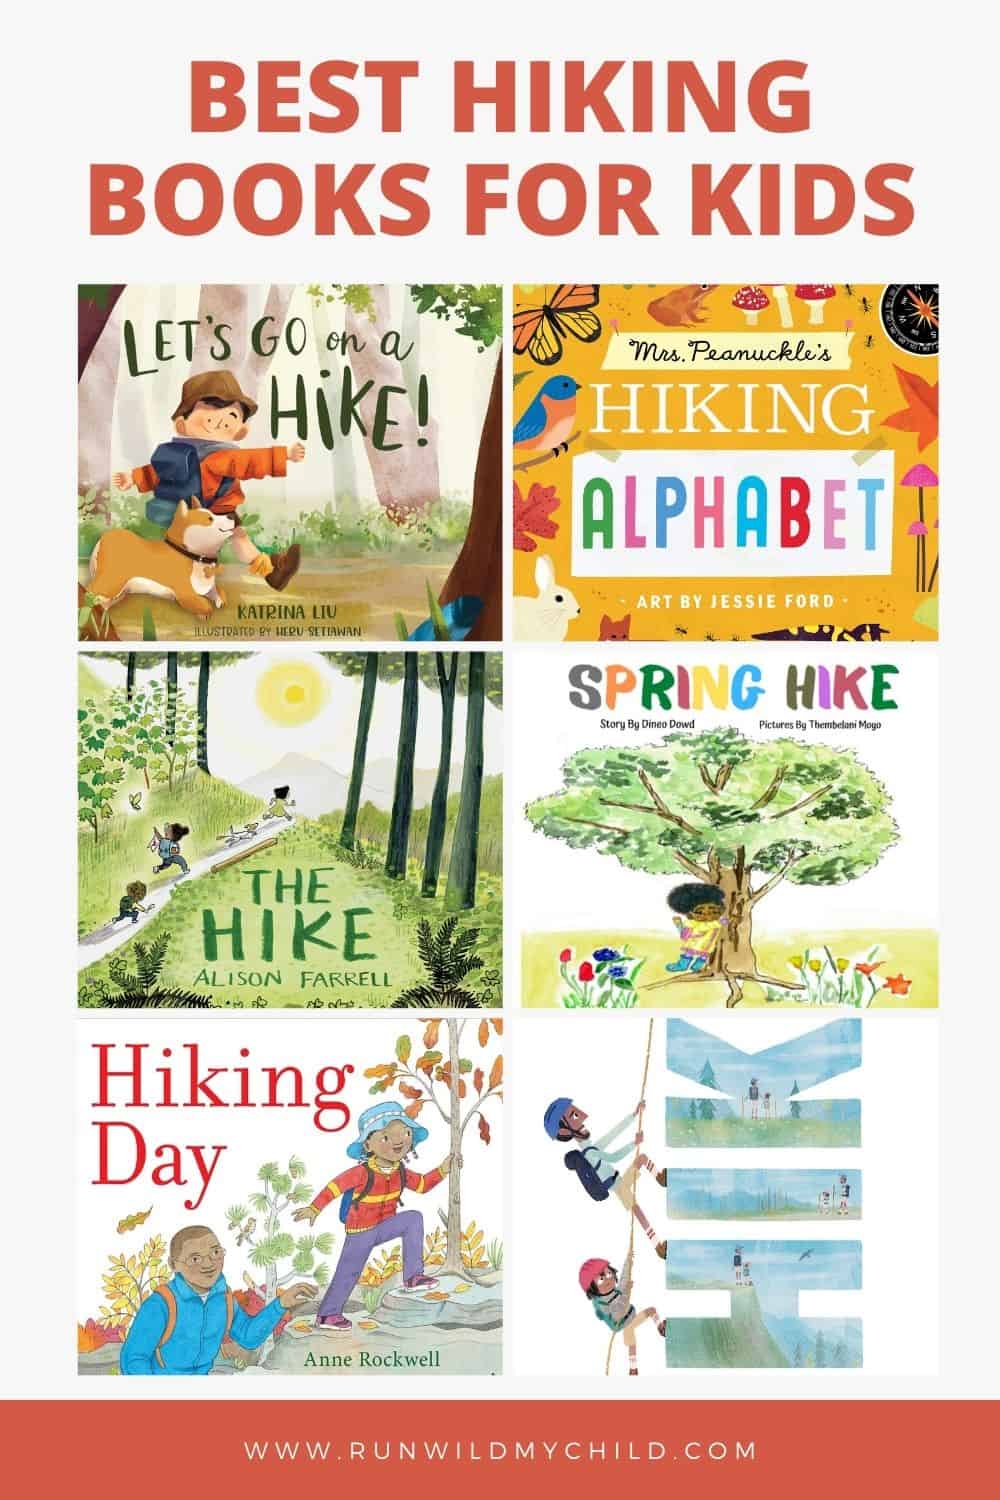 Best Hiking Books for Kids 2